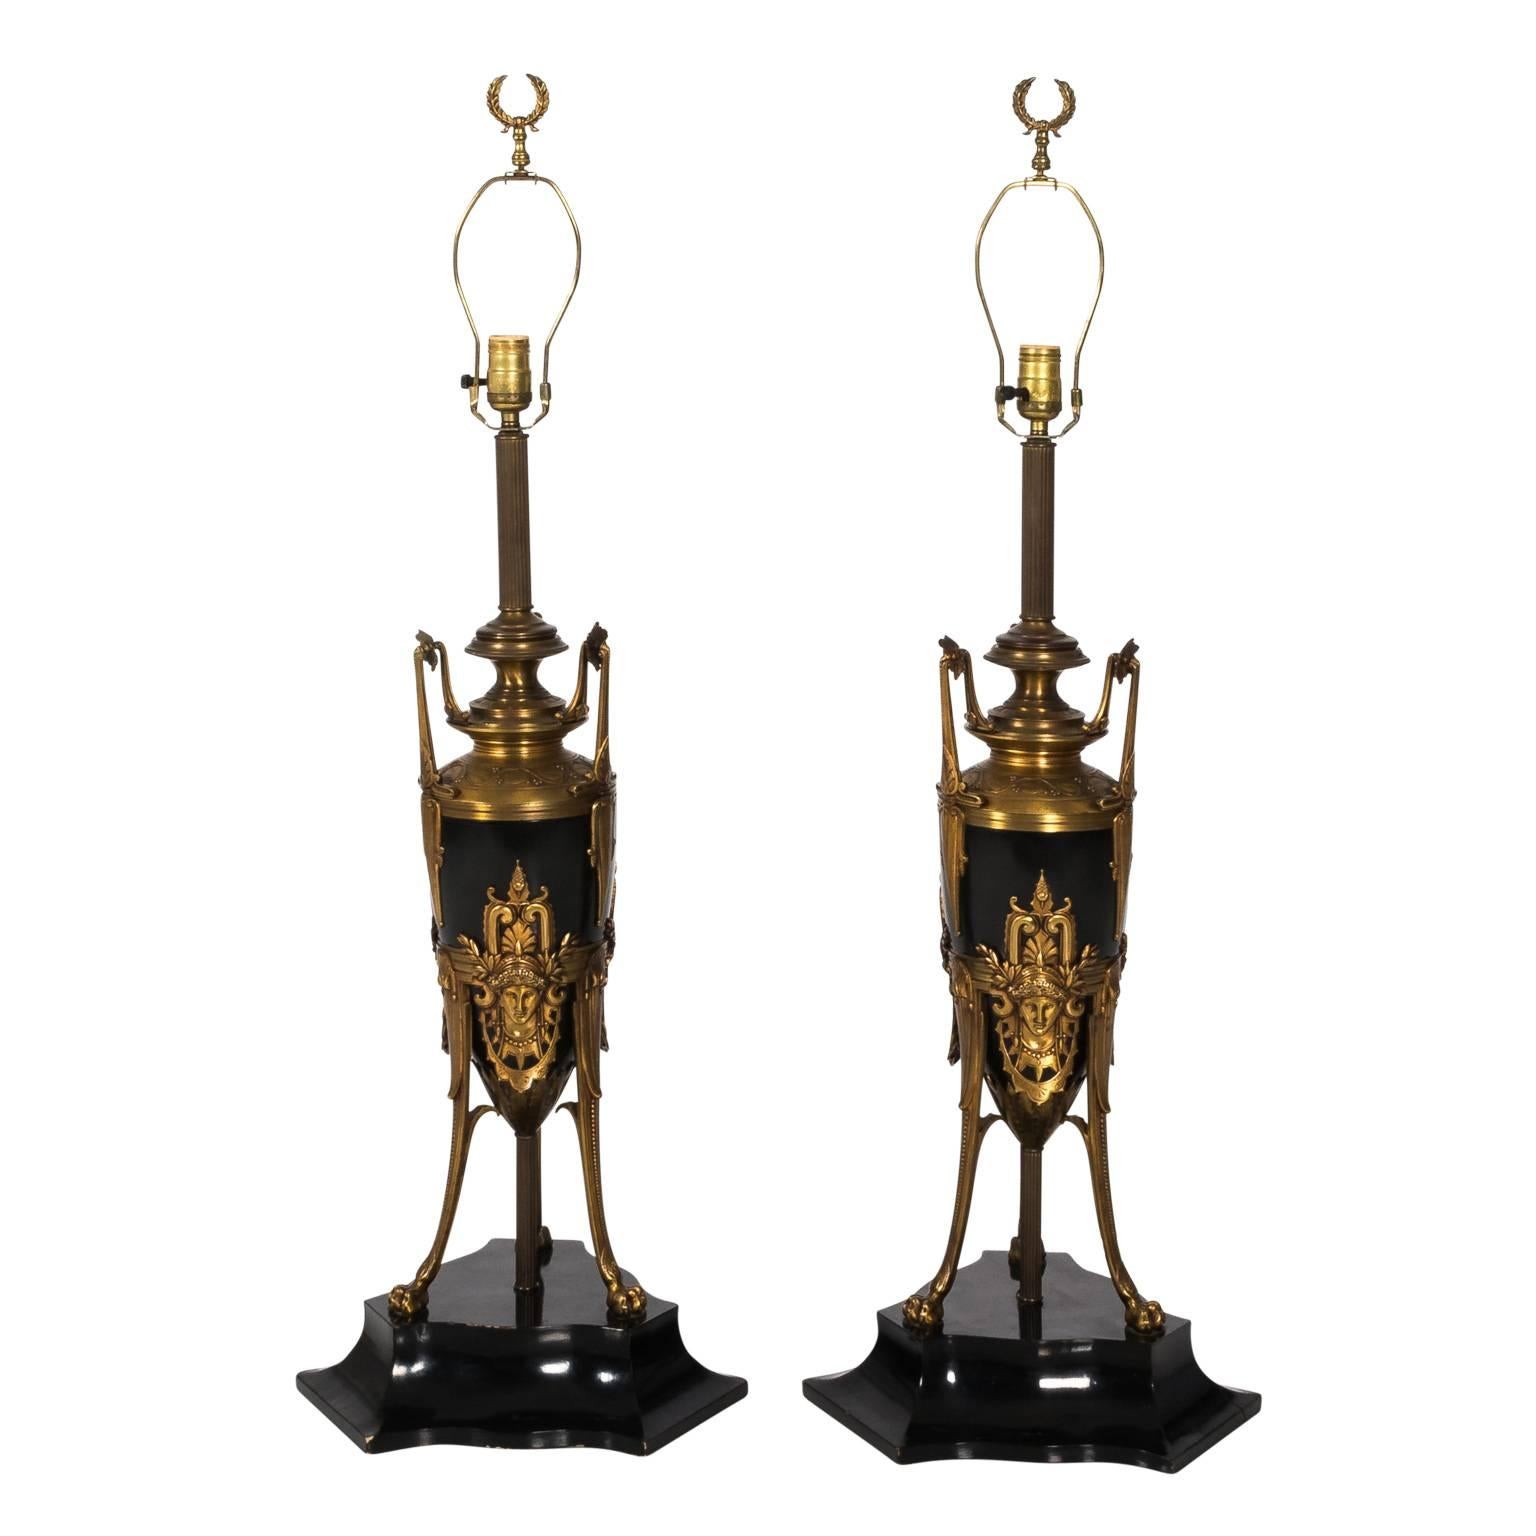 Pair of Aesthetic Style Urn Lamps